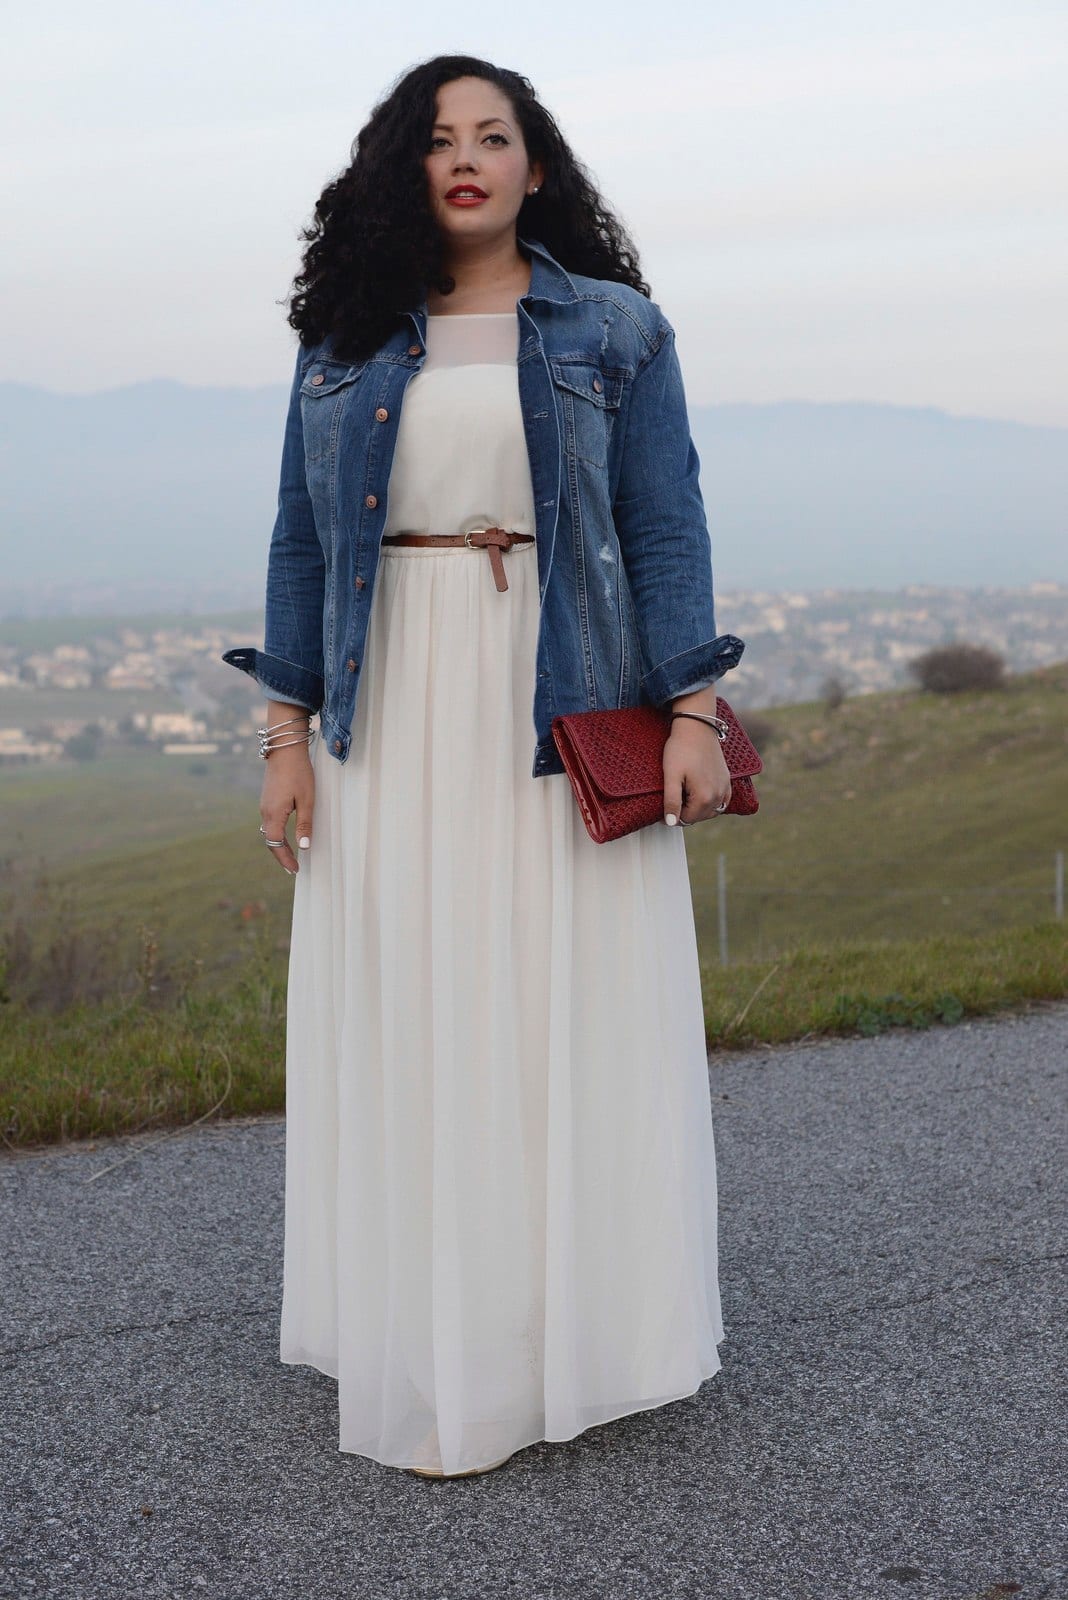 plus outfits outfit gorgeous season source stylish maxi thighs loose around